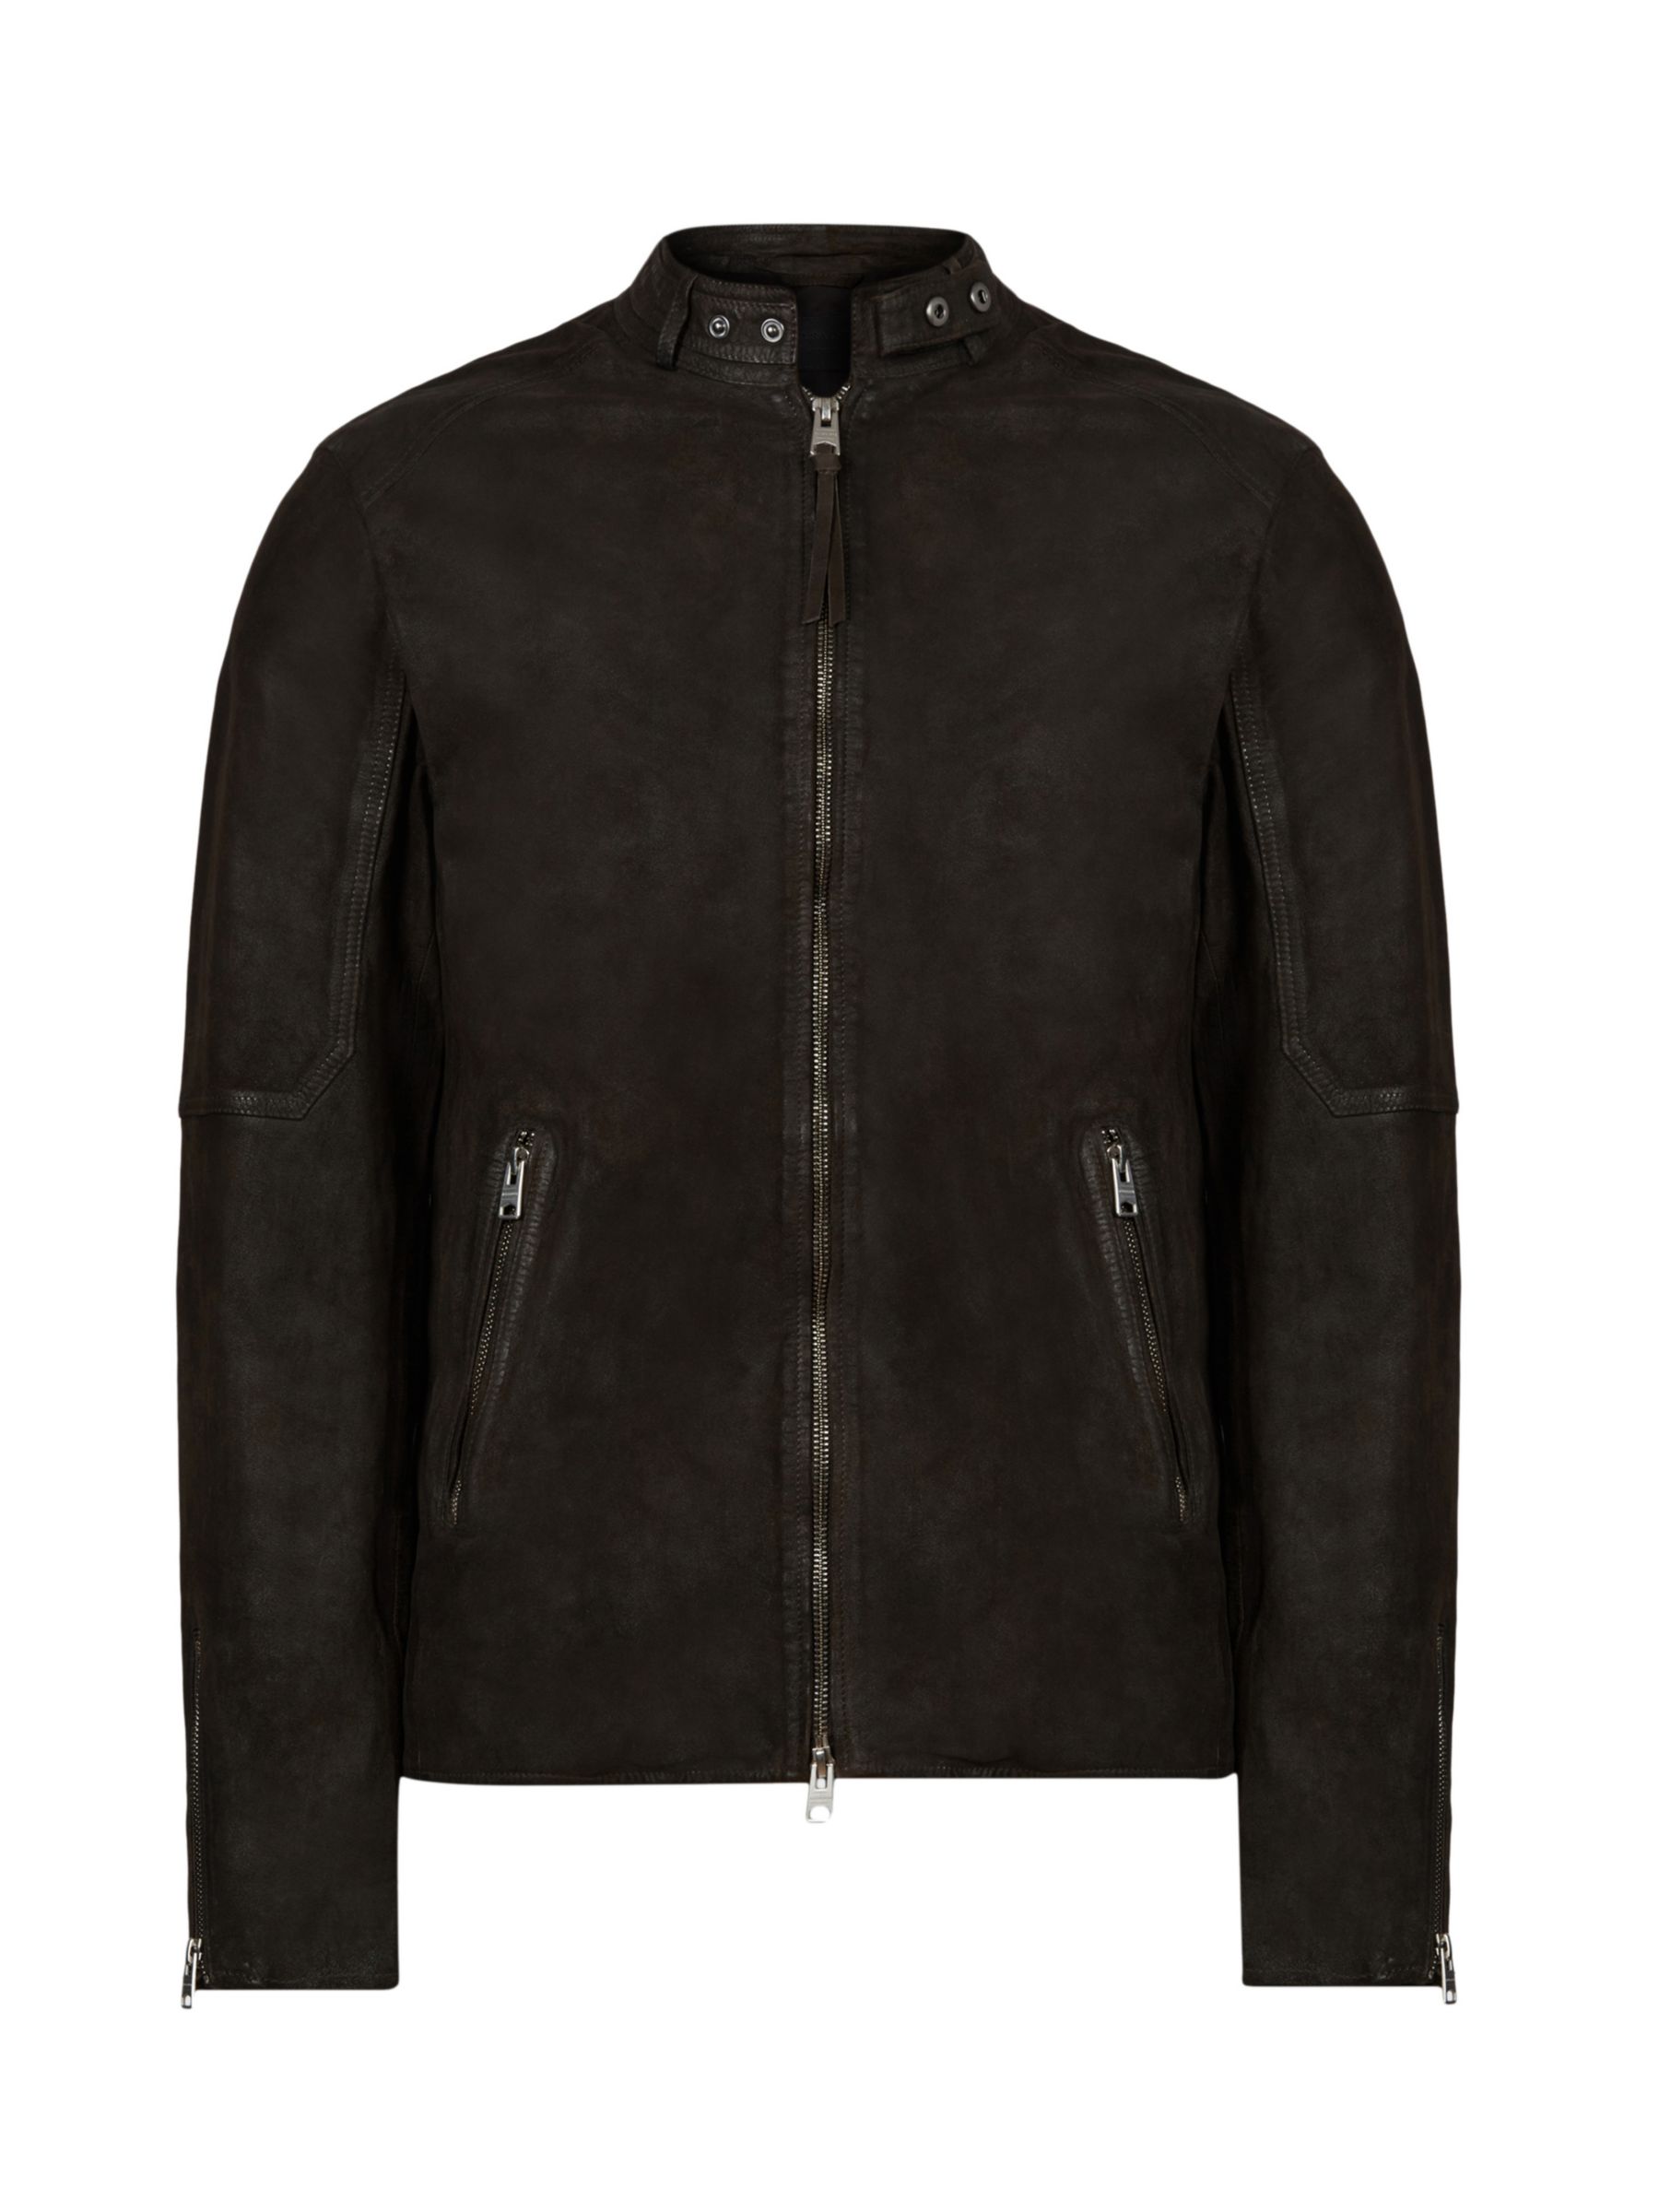 AllSaints Cora Leather Jacket, Anthracite Grey at John Lewis & Partners